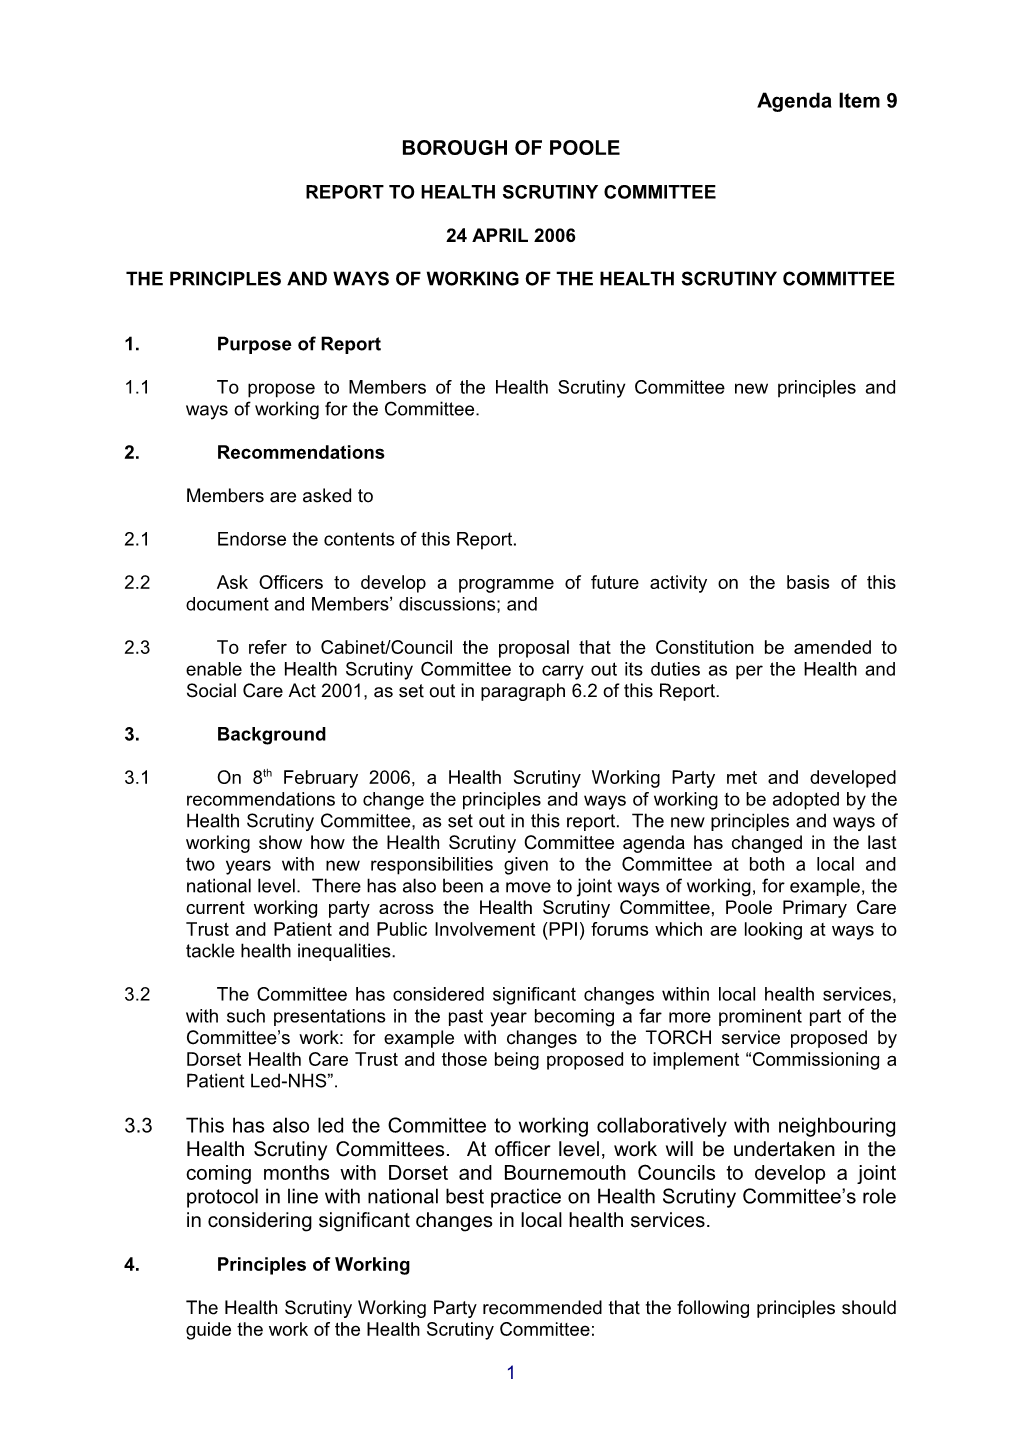 The Principles and Ways of Working of the Health Scrutiny Committee